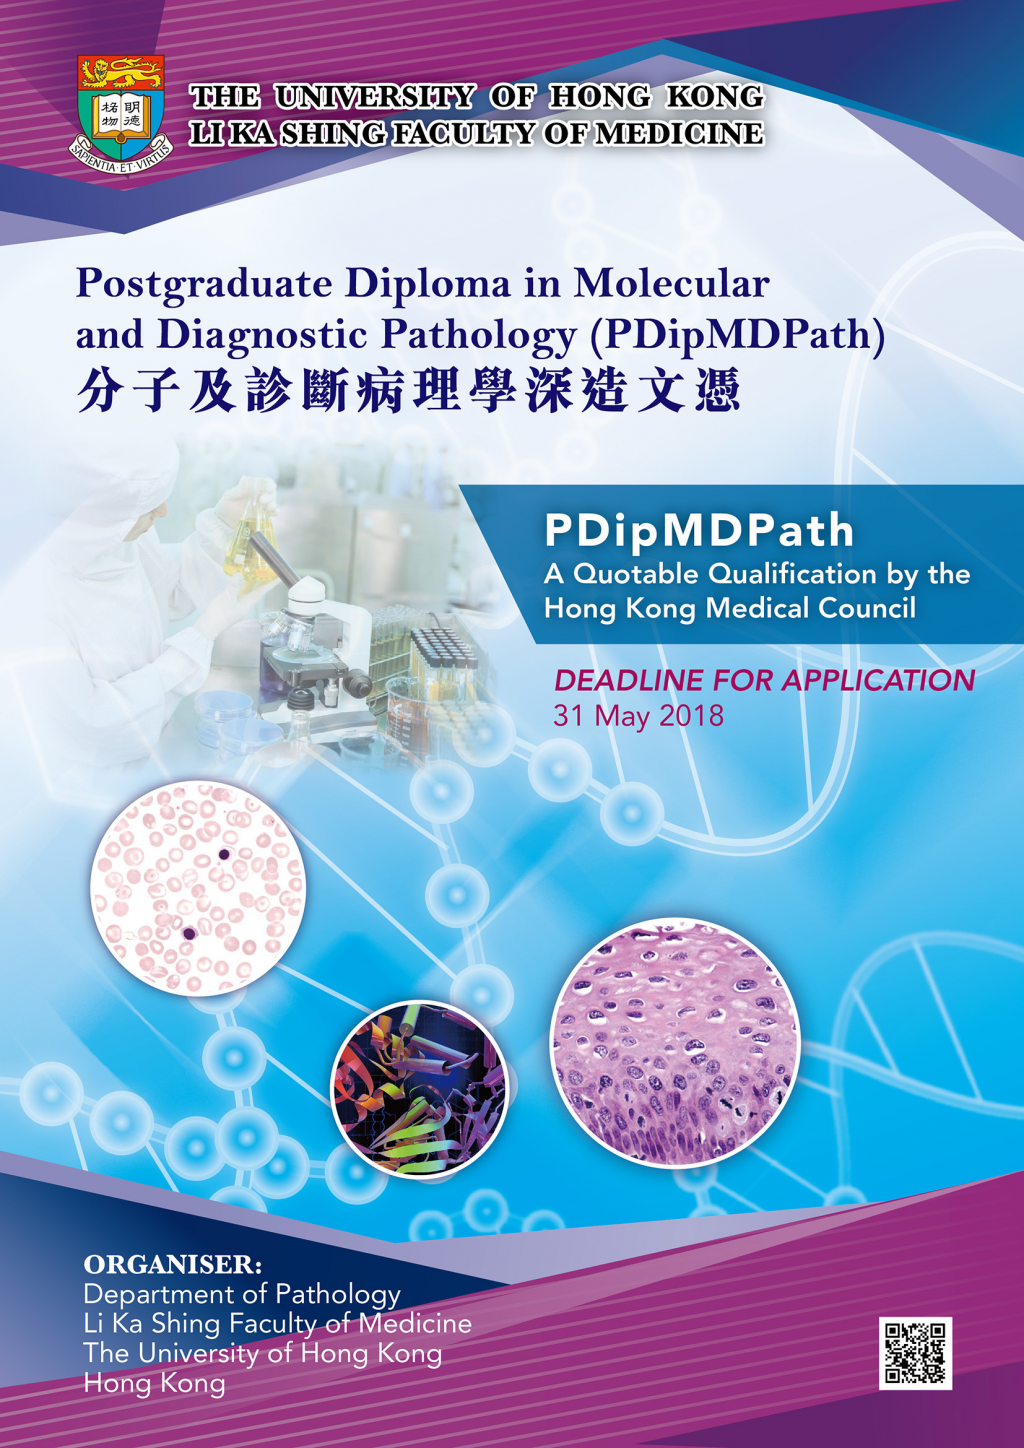 Postgraduate Diploma in Molecular & Diagnostic Pathology - Call for Applications